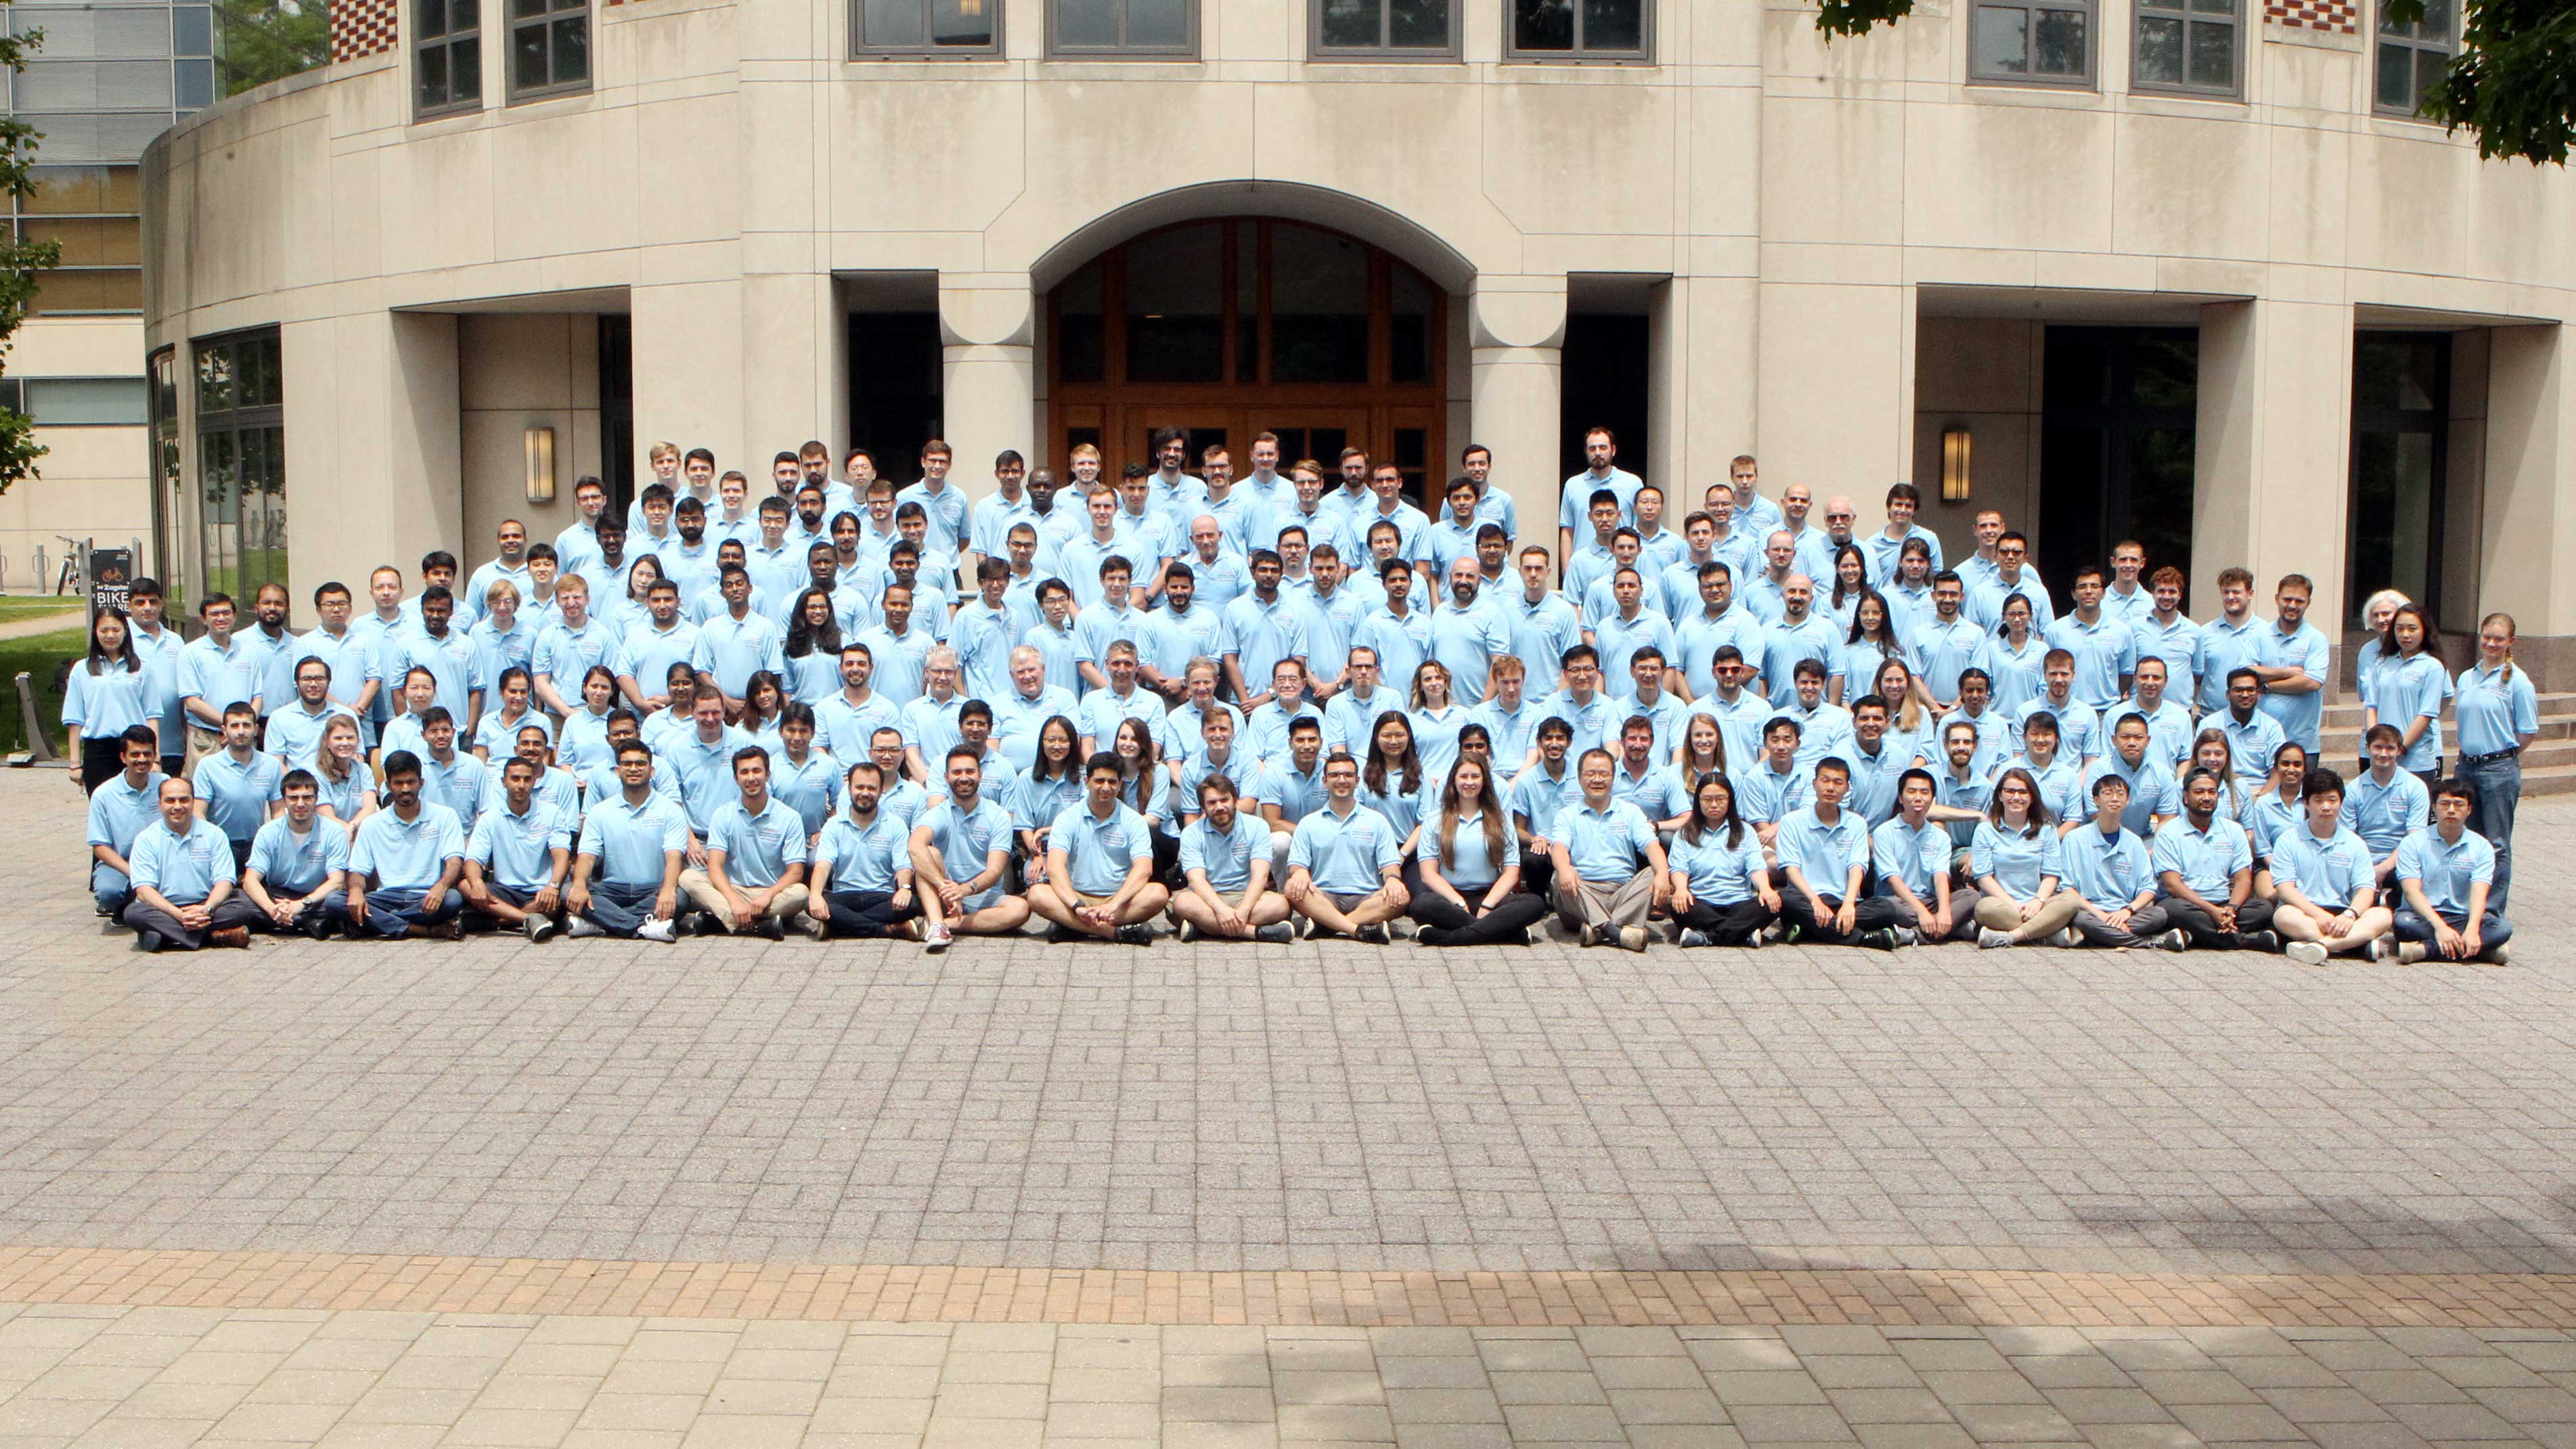 Group of 200 people in light blue shirts posing in front of a building